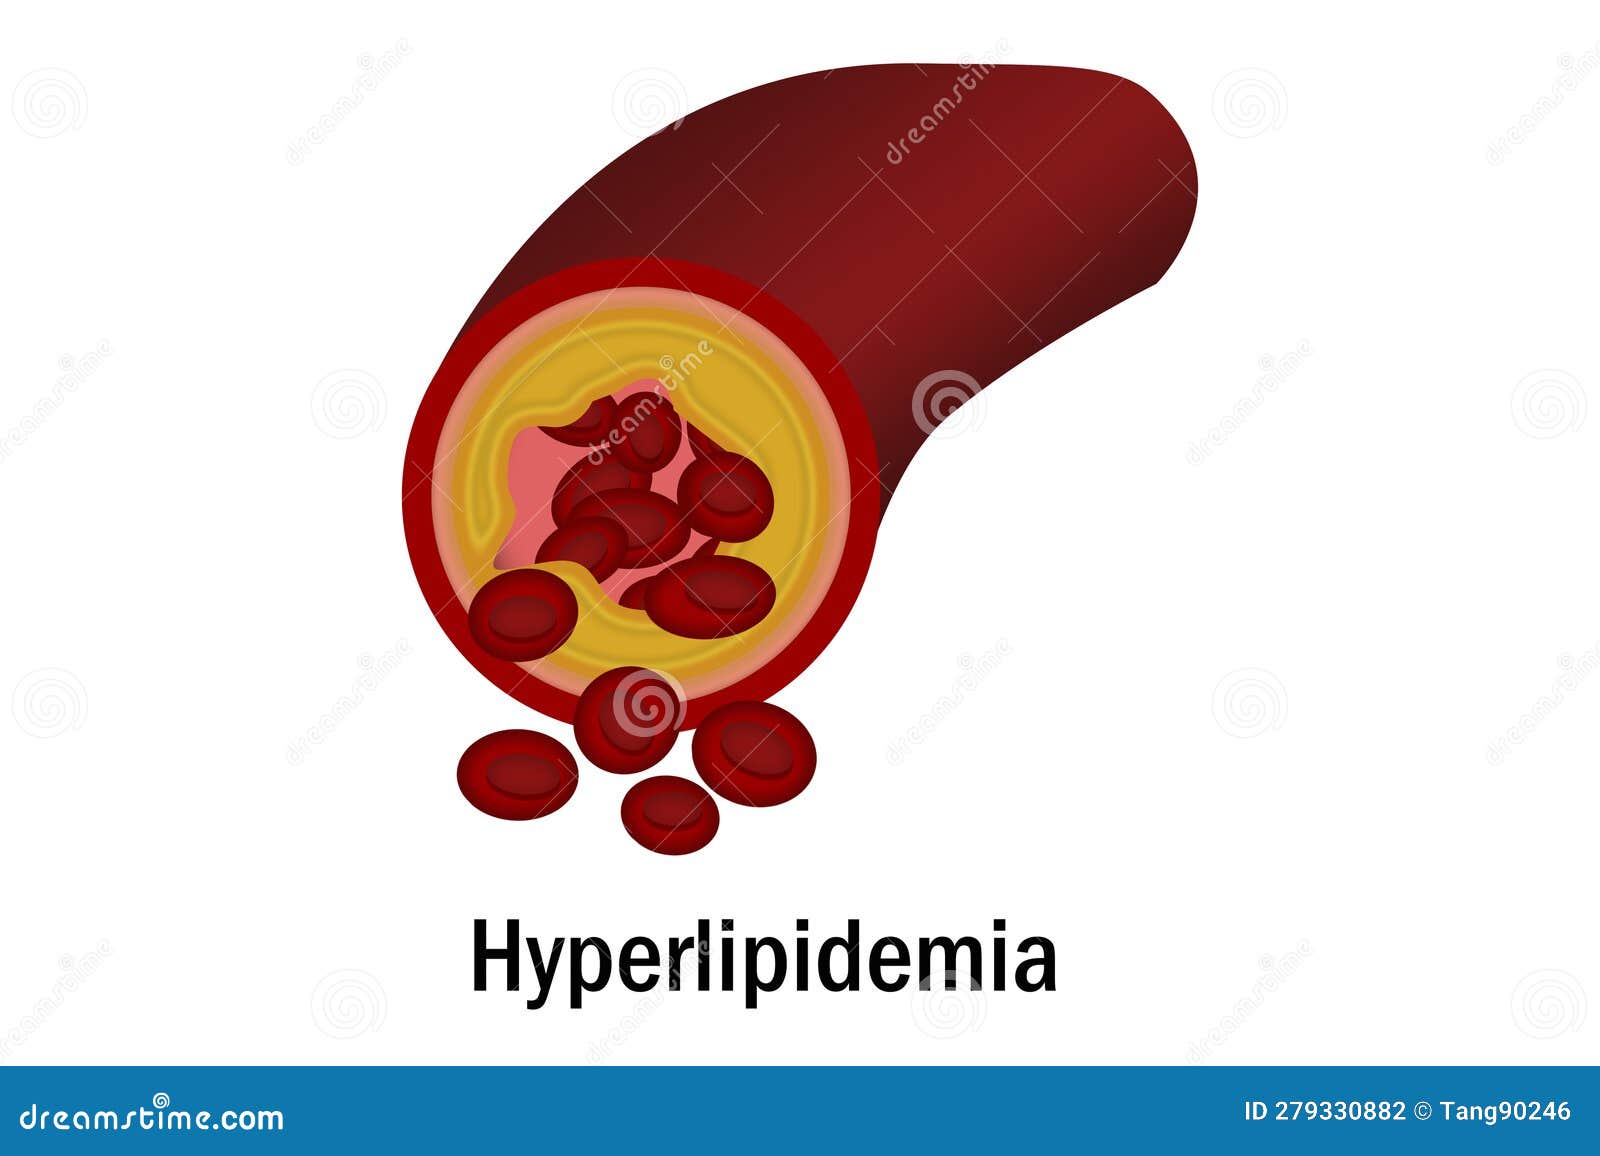 hyperlipidemia with blood vessel 